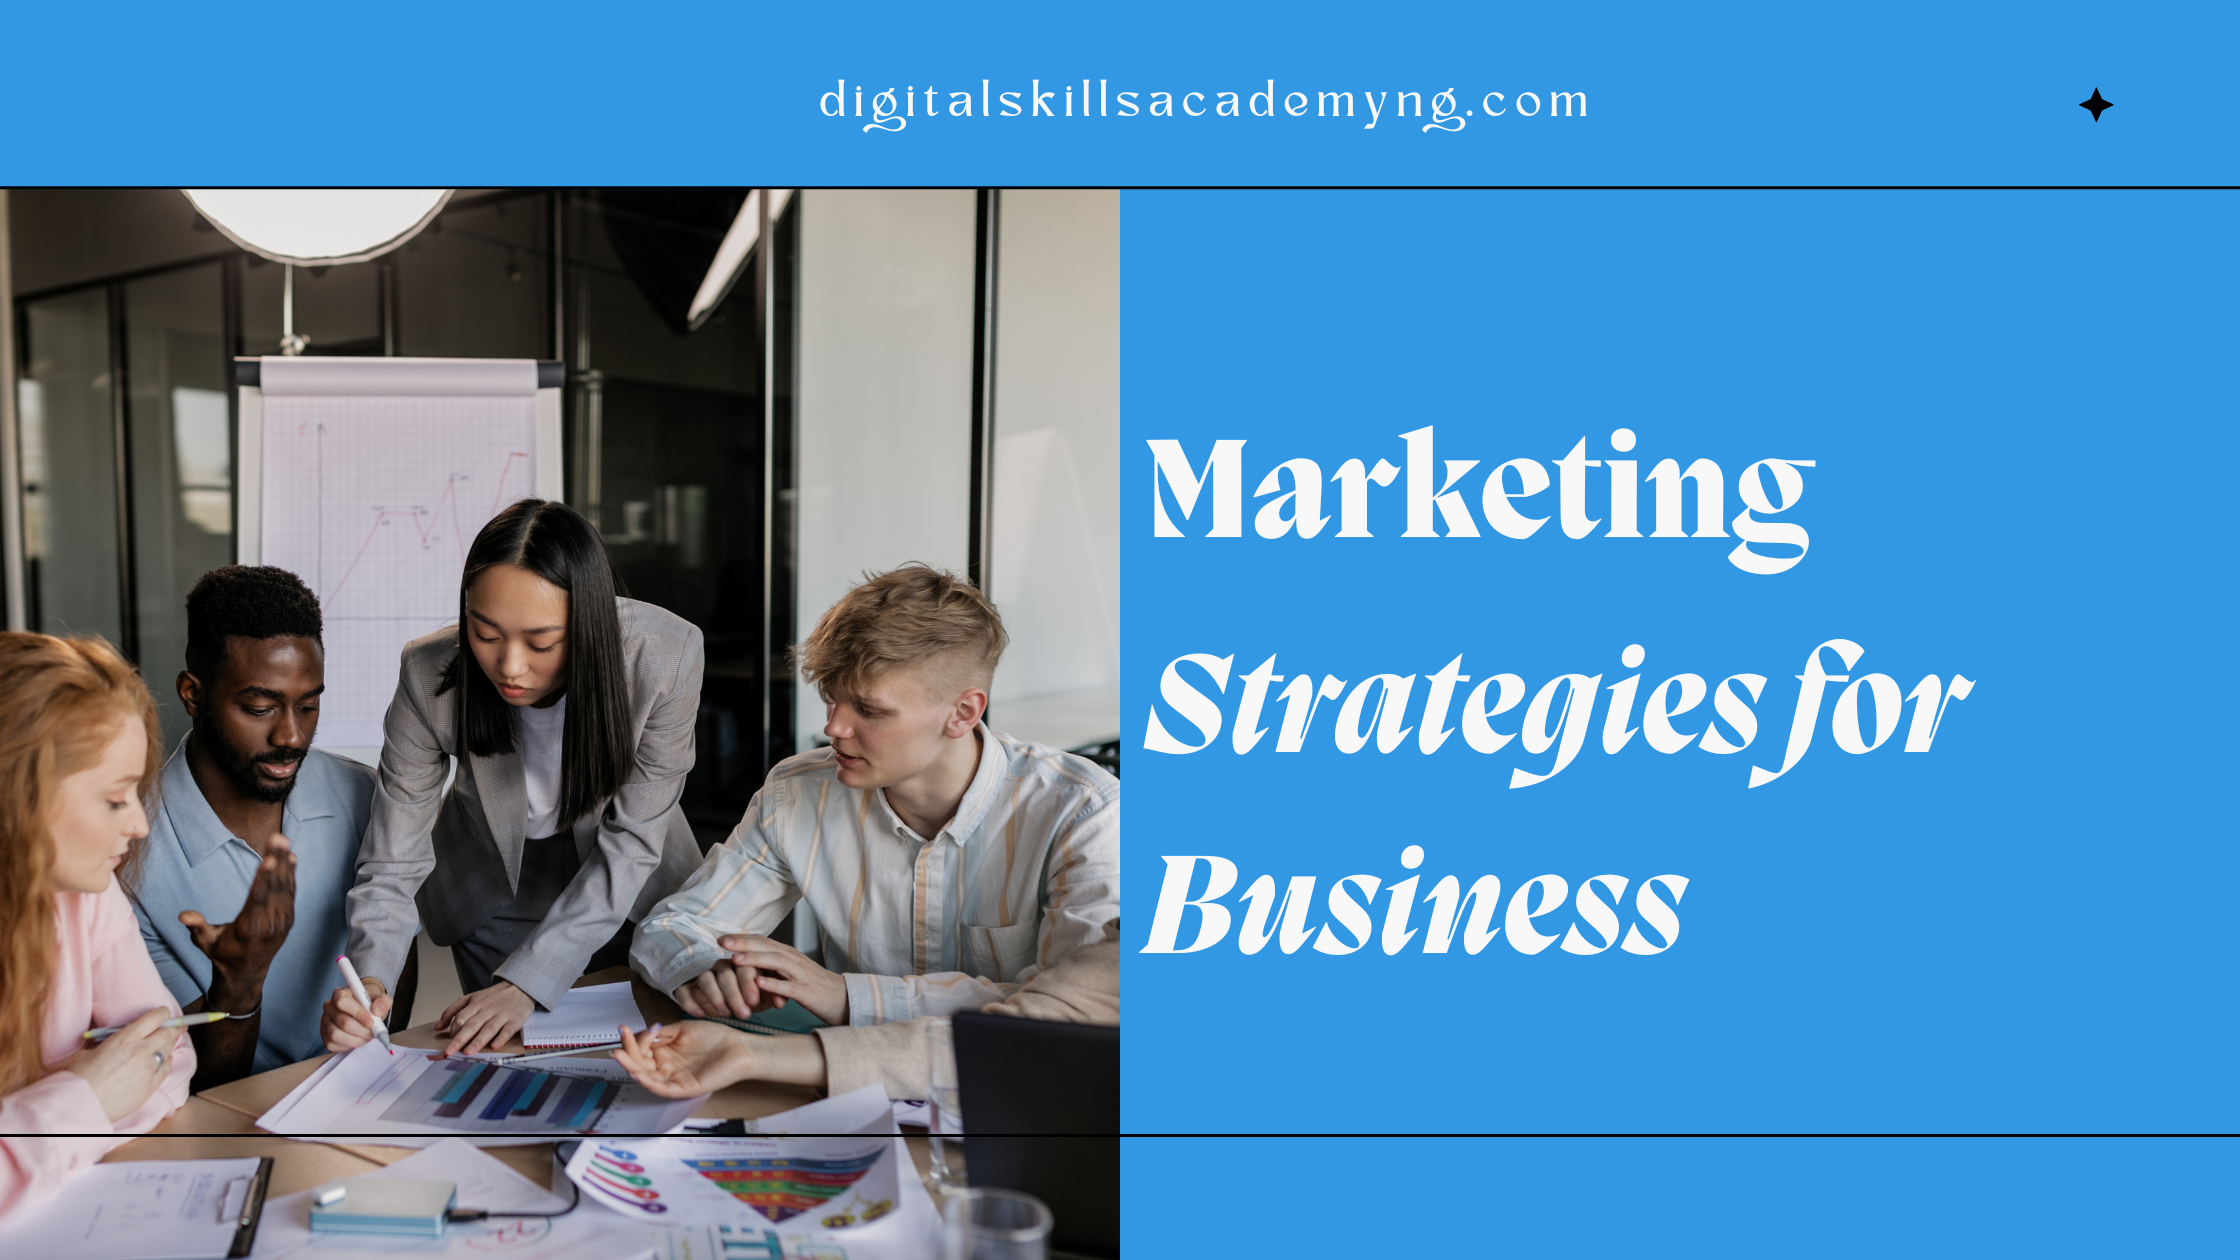 You are currently viewing Marketing Strategies for Business